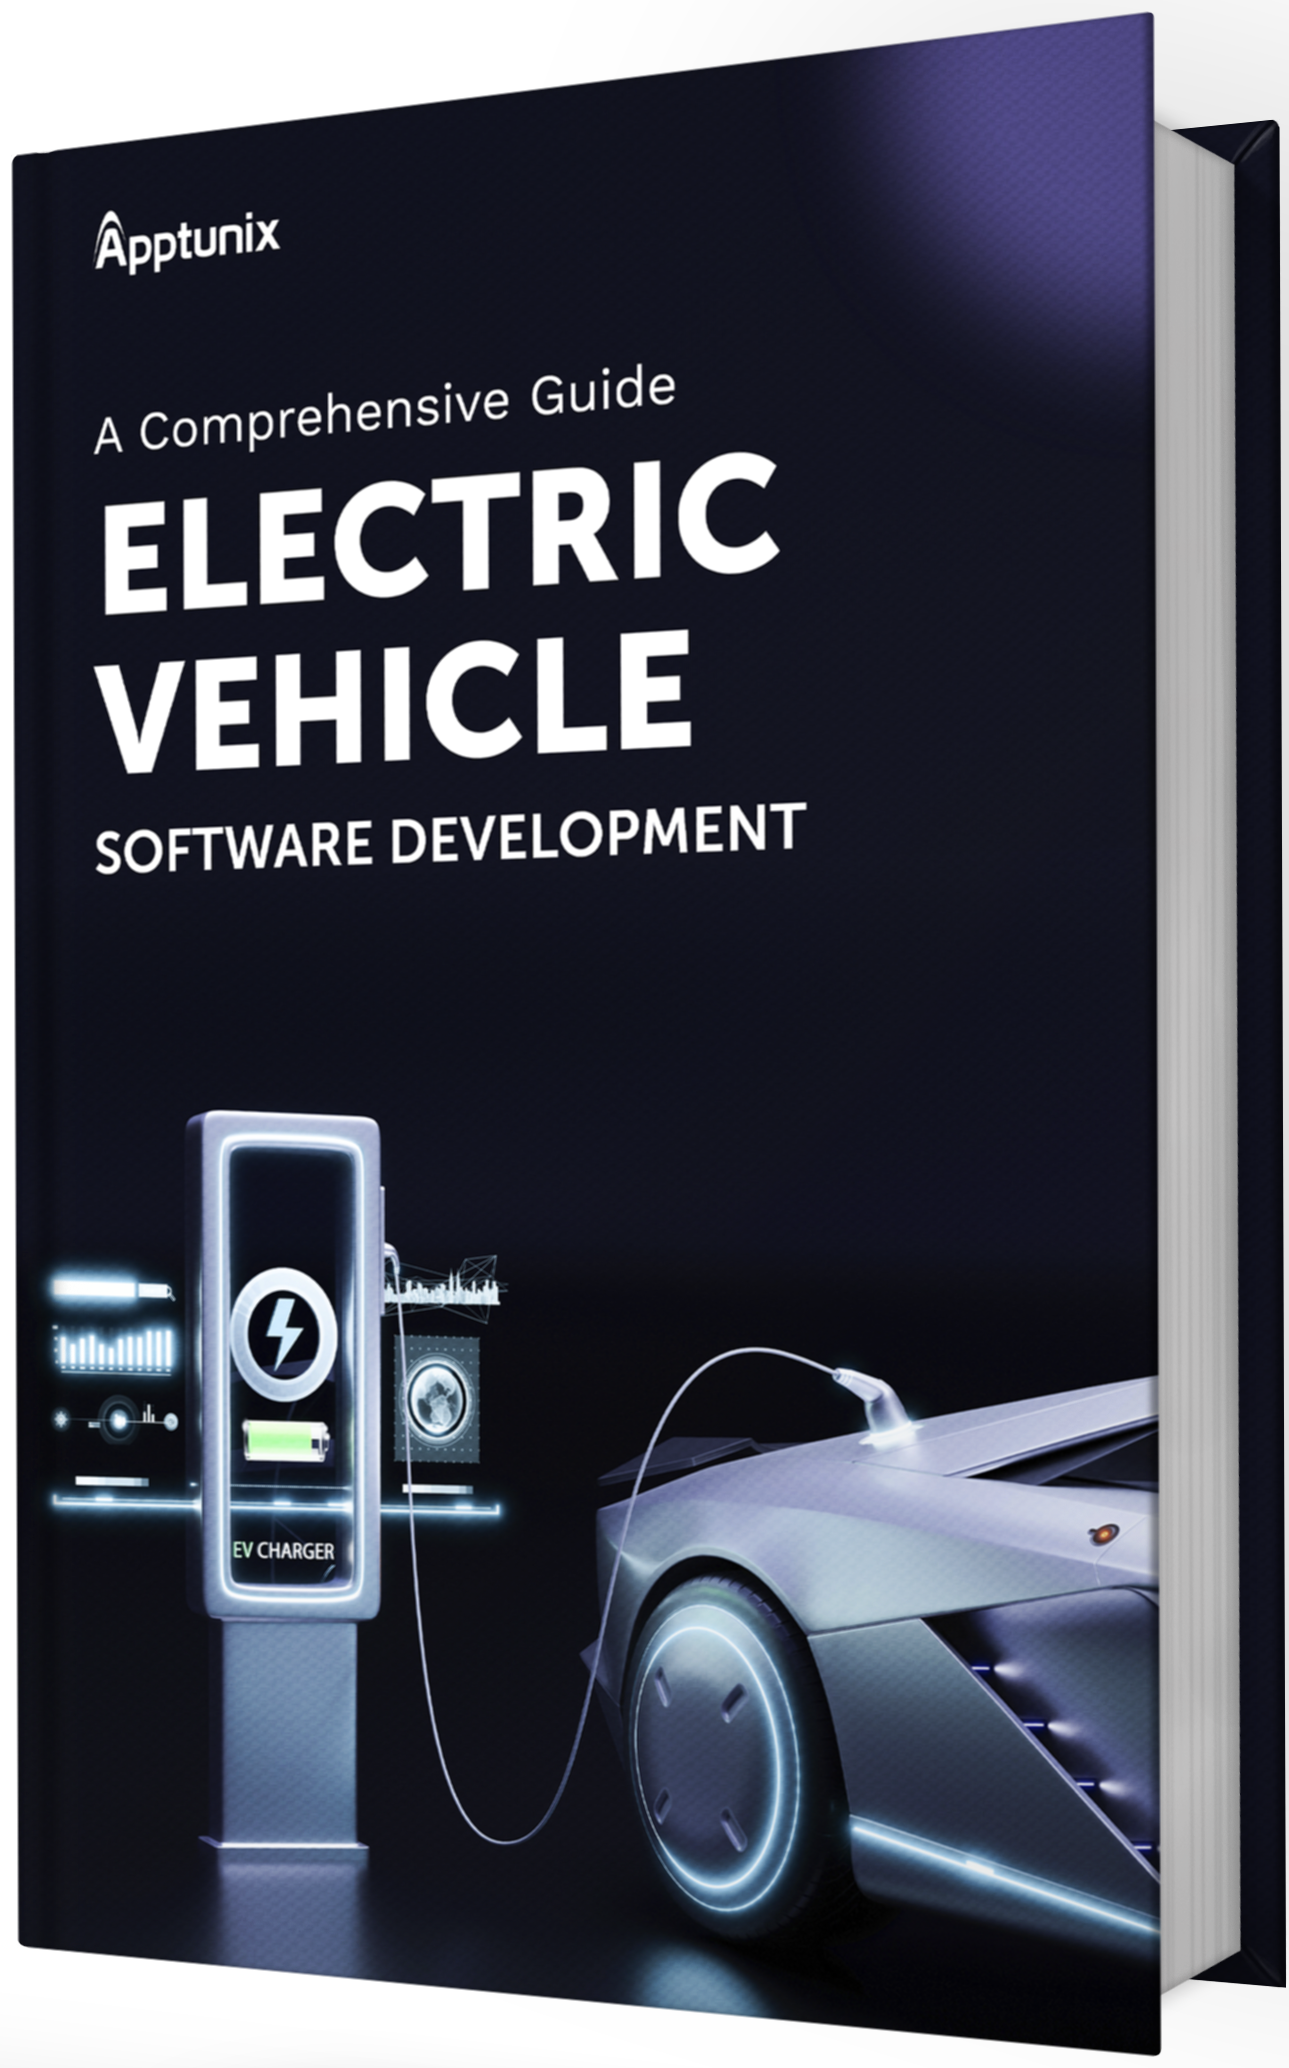 Electric Vehicle Software Development - A Comprehensive Guide